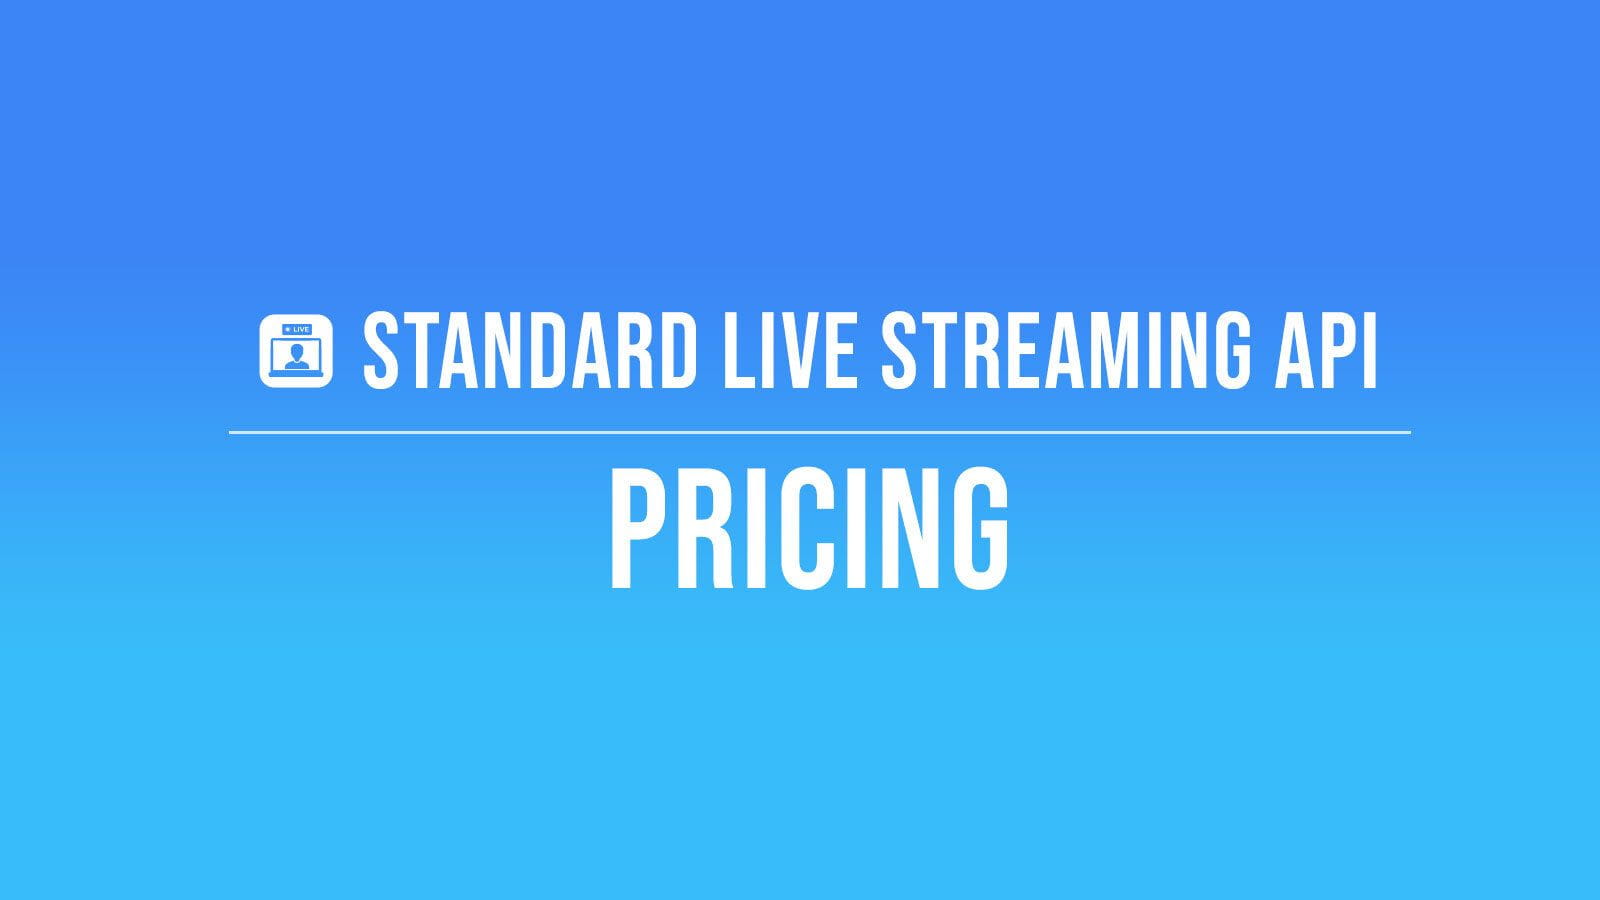 Standard Live Streaming Pricing